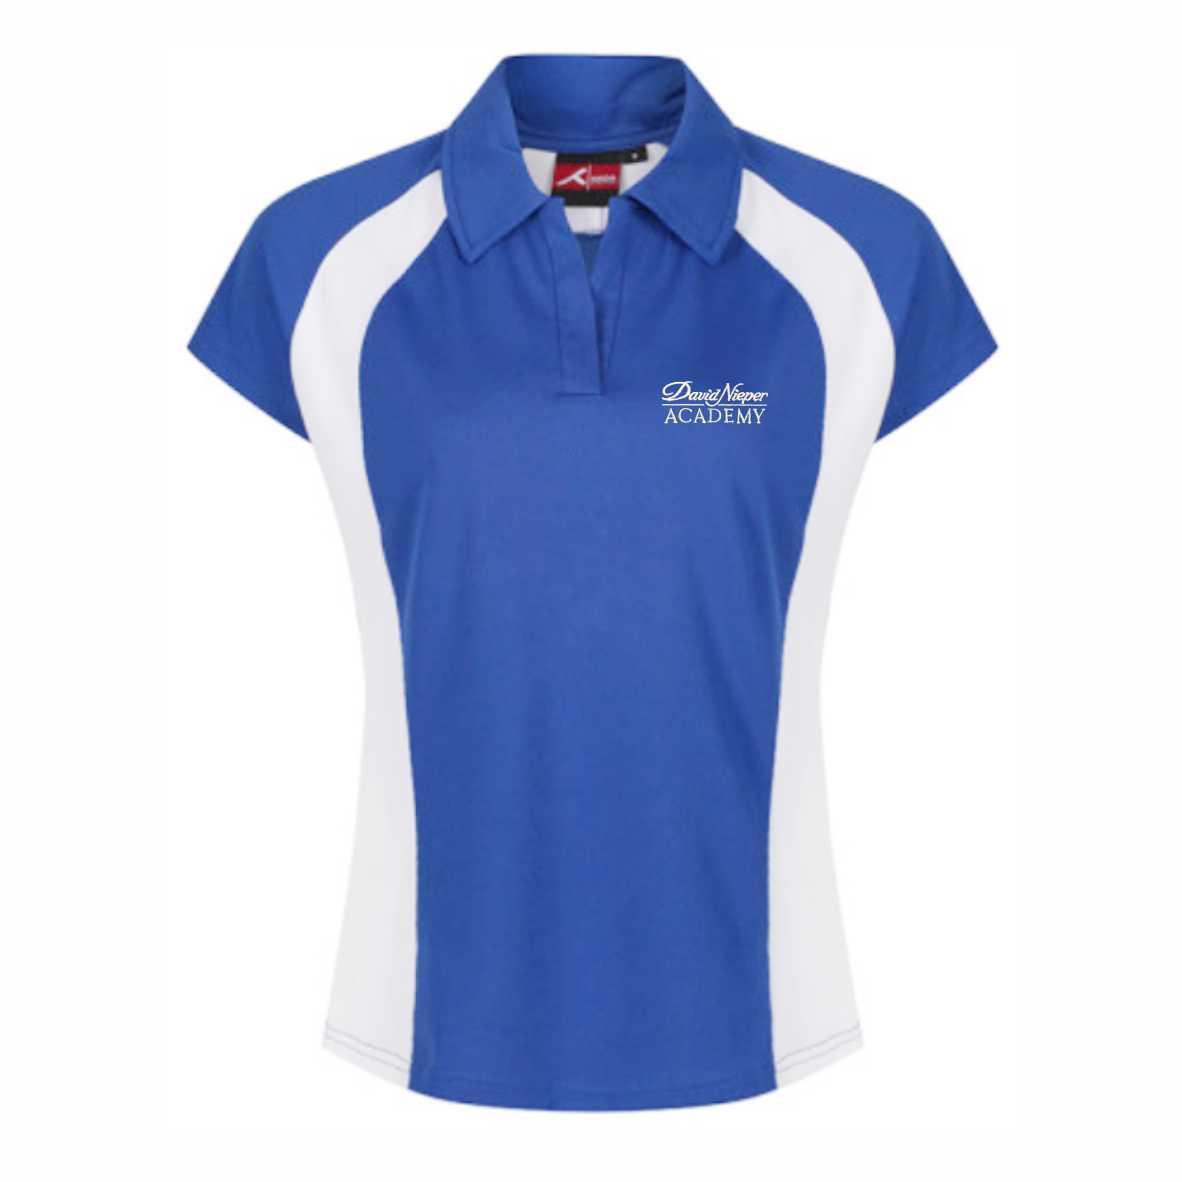 https://www.schoolwearsolutions.com/wp-content/uploads/BR40-David-Nieper-Girls-Royal-Polo-Shirt.png